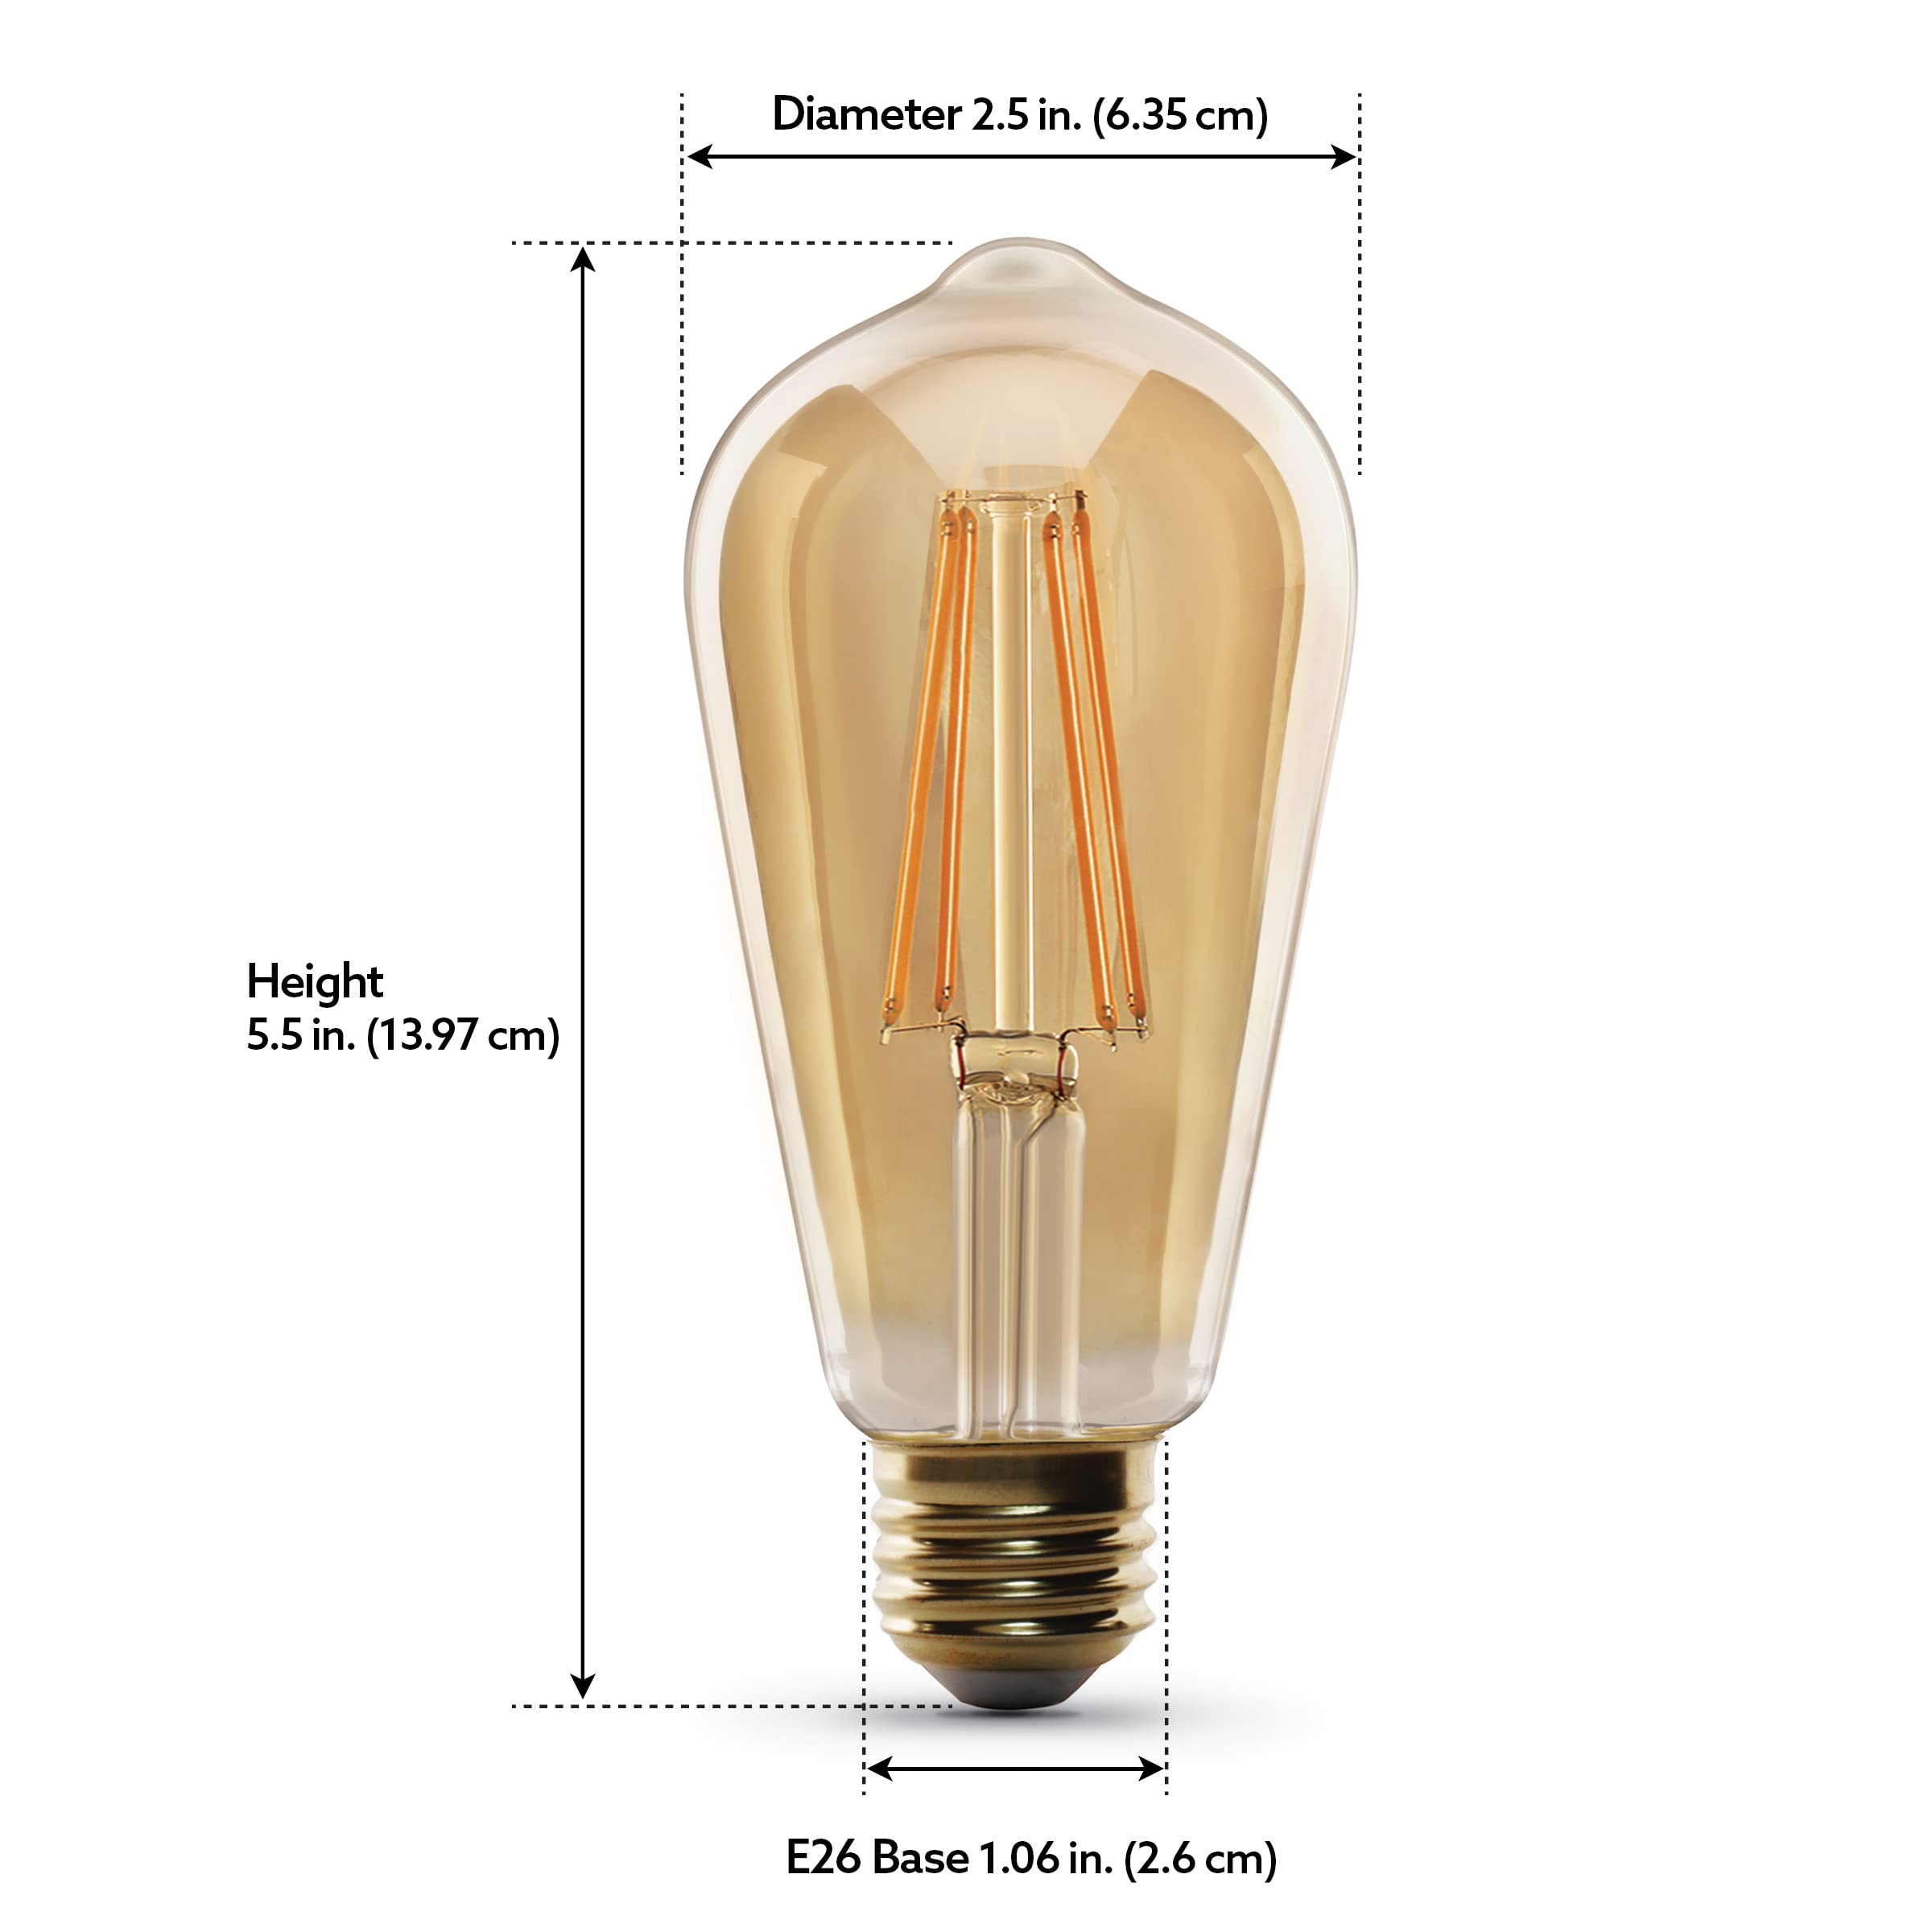 Feit Electric ST1960/FIL/AG 60 Watt Equivalent WiFi Dimmable, No Hub Required, Alexa or Google Assistant ST19 Edison Vintage LED Smart Light Bulb, Yellow, 5.4